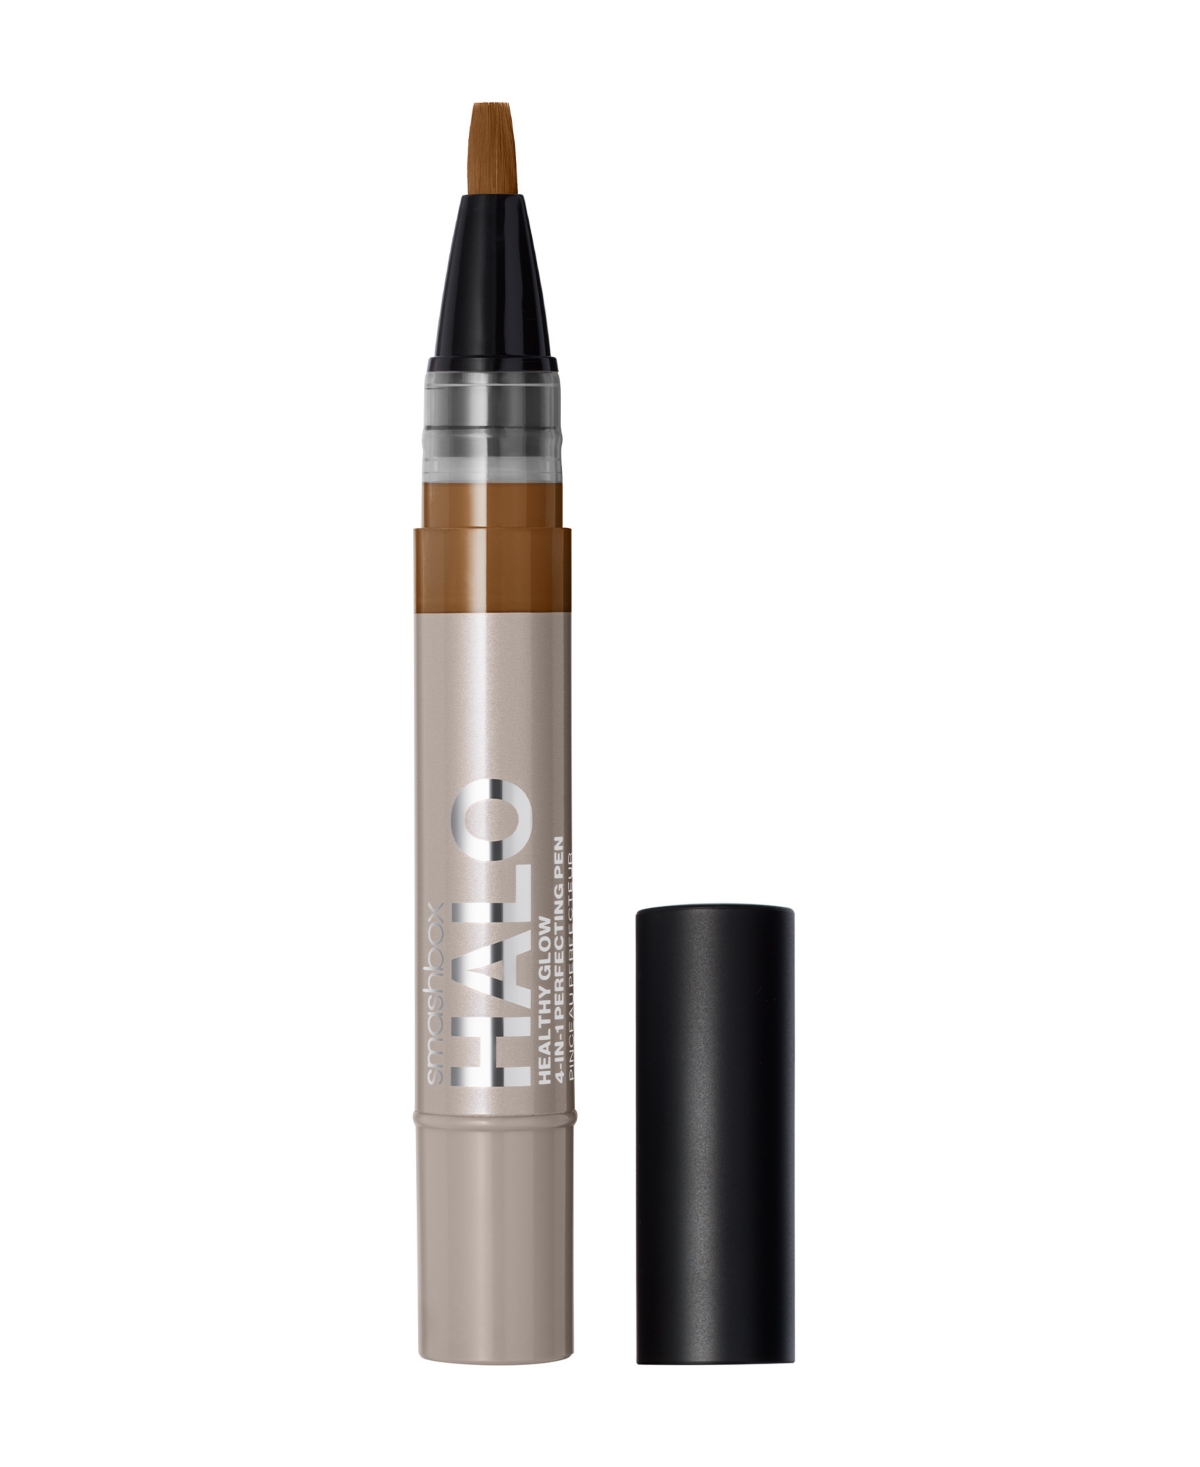 Smashbox Halo Healthy Glow 4-in-1 Perfecting Pen In D-w (level-one Dark With A Warm Underton